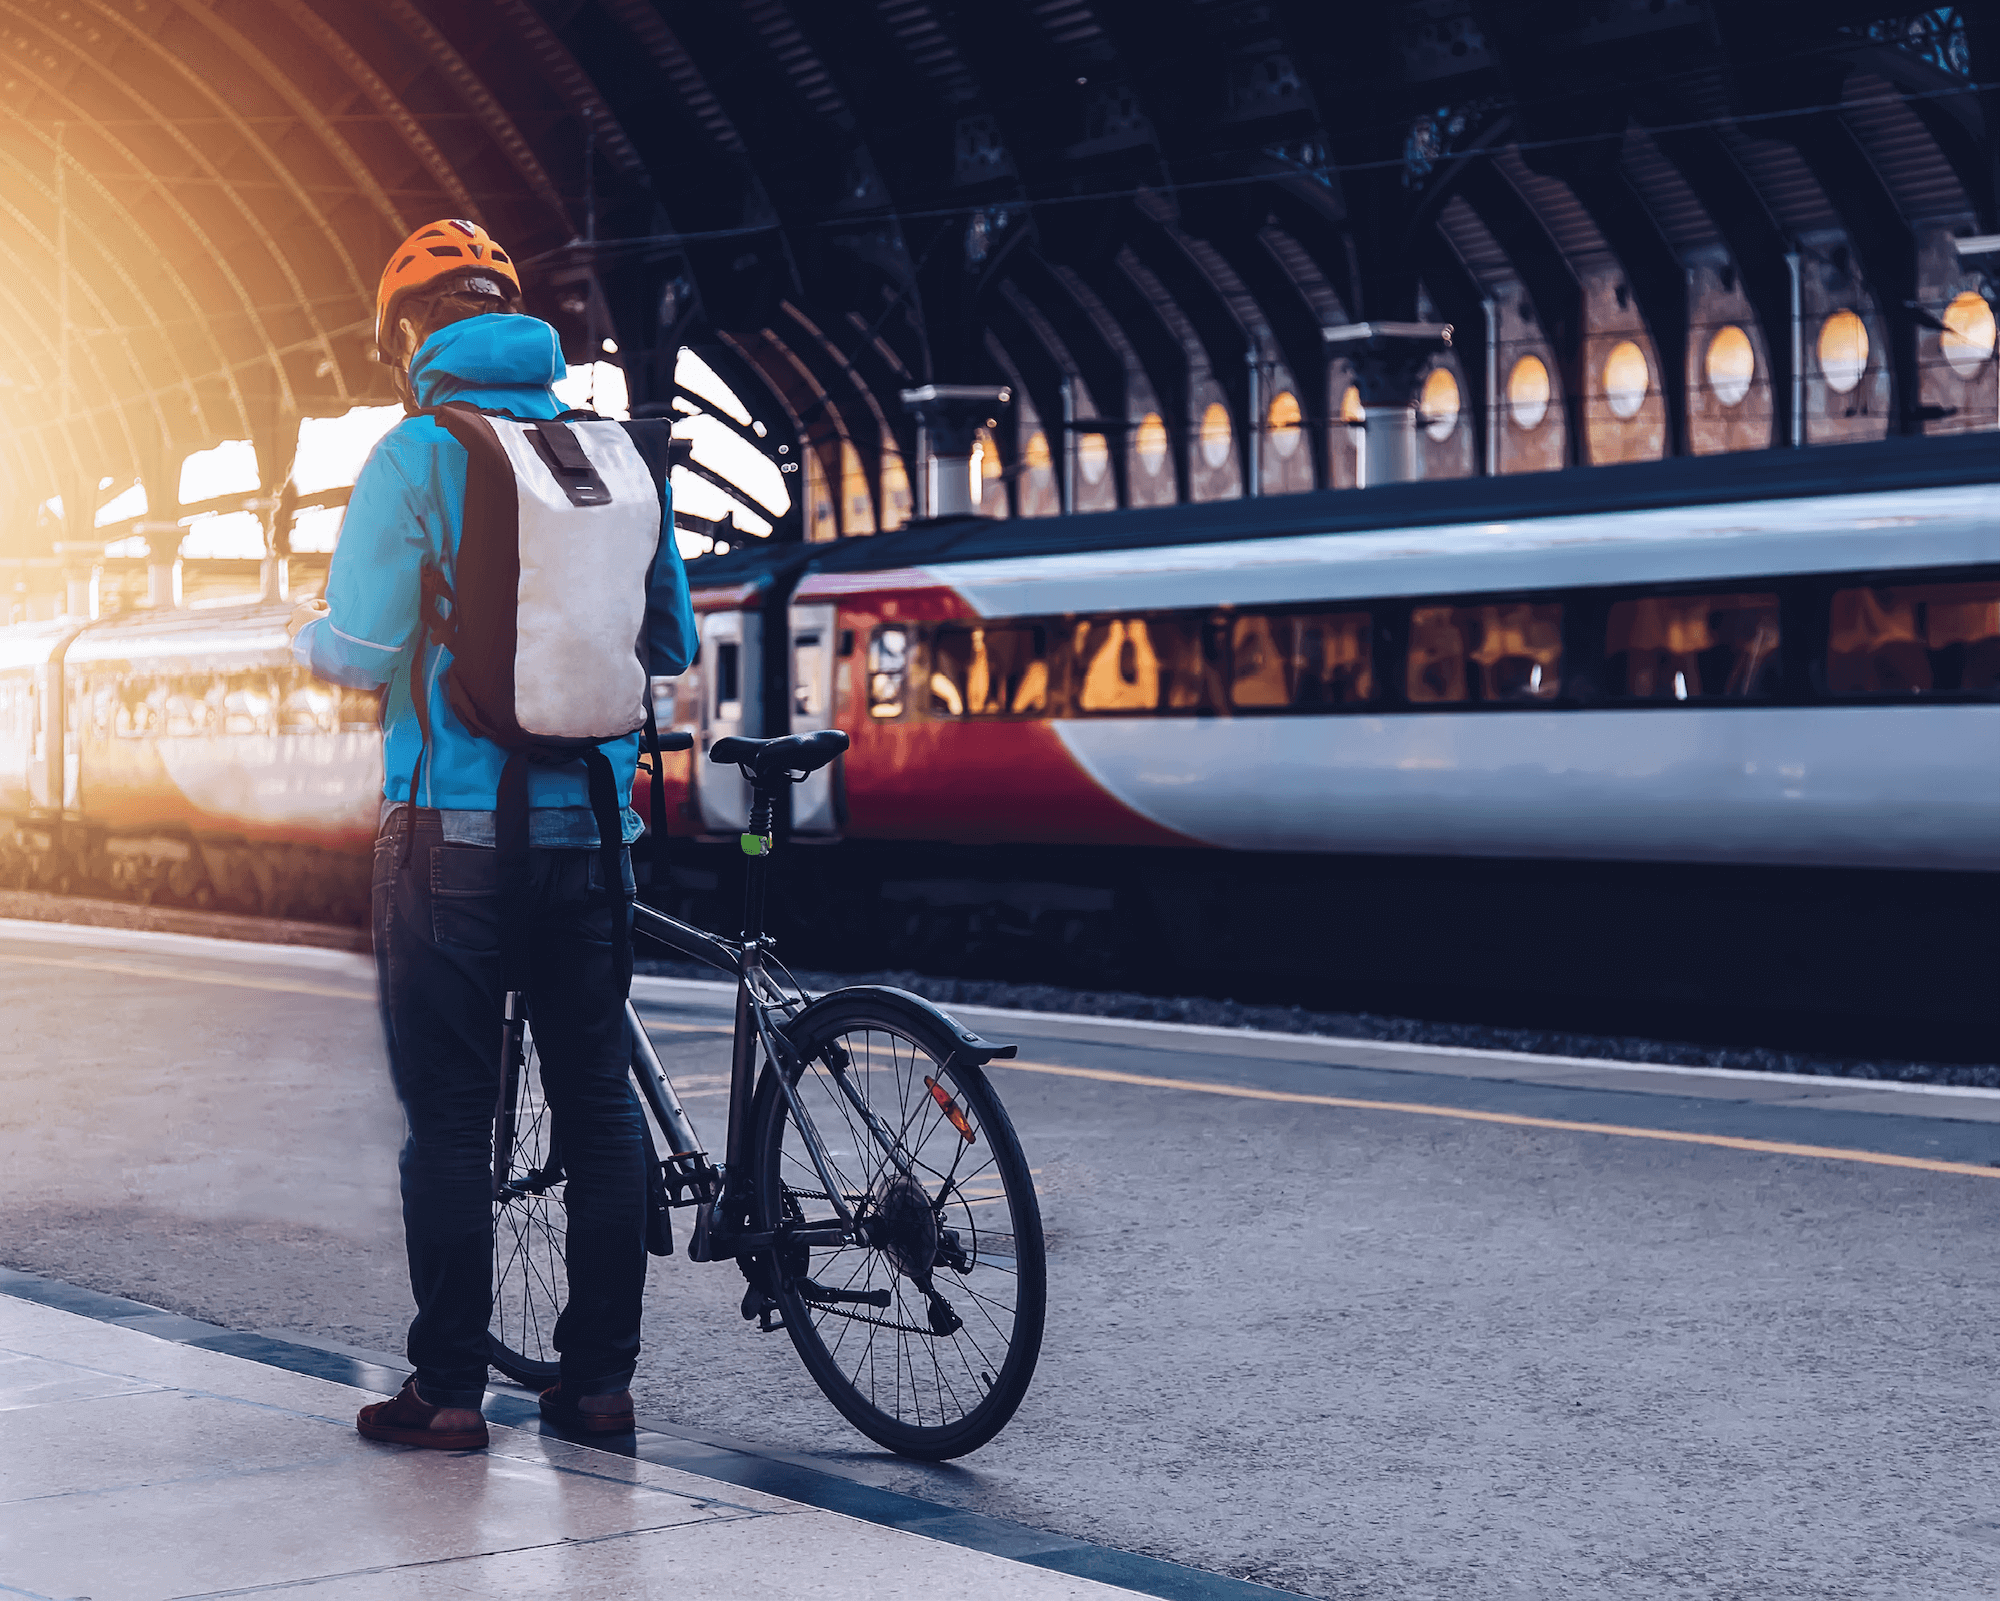 Rail passenger with a bicycle at a train station